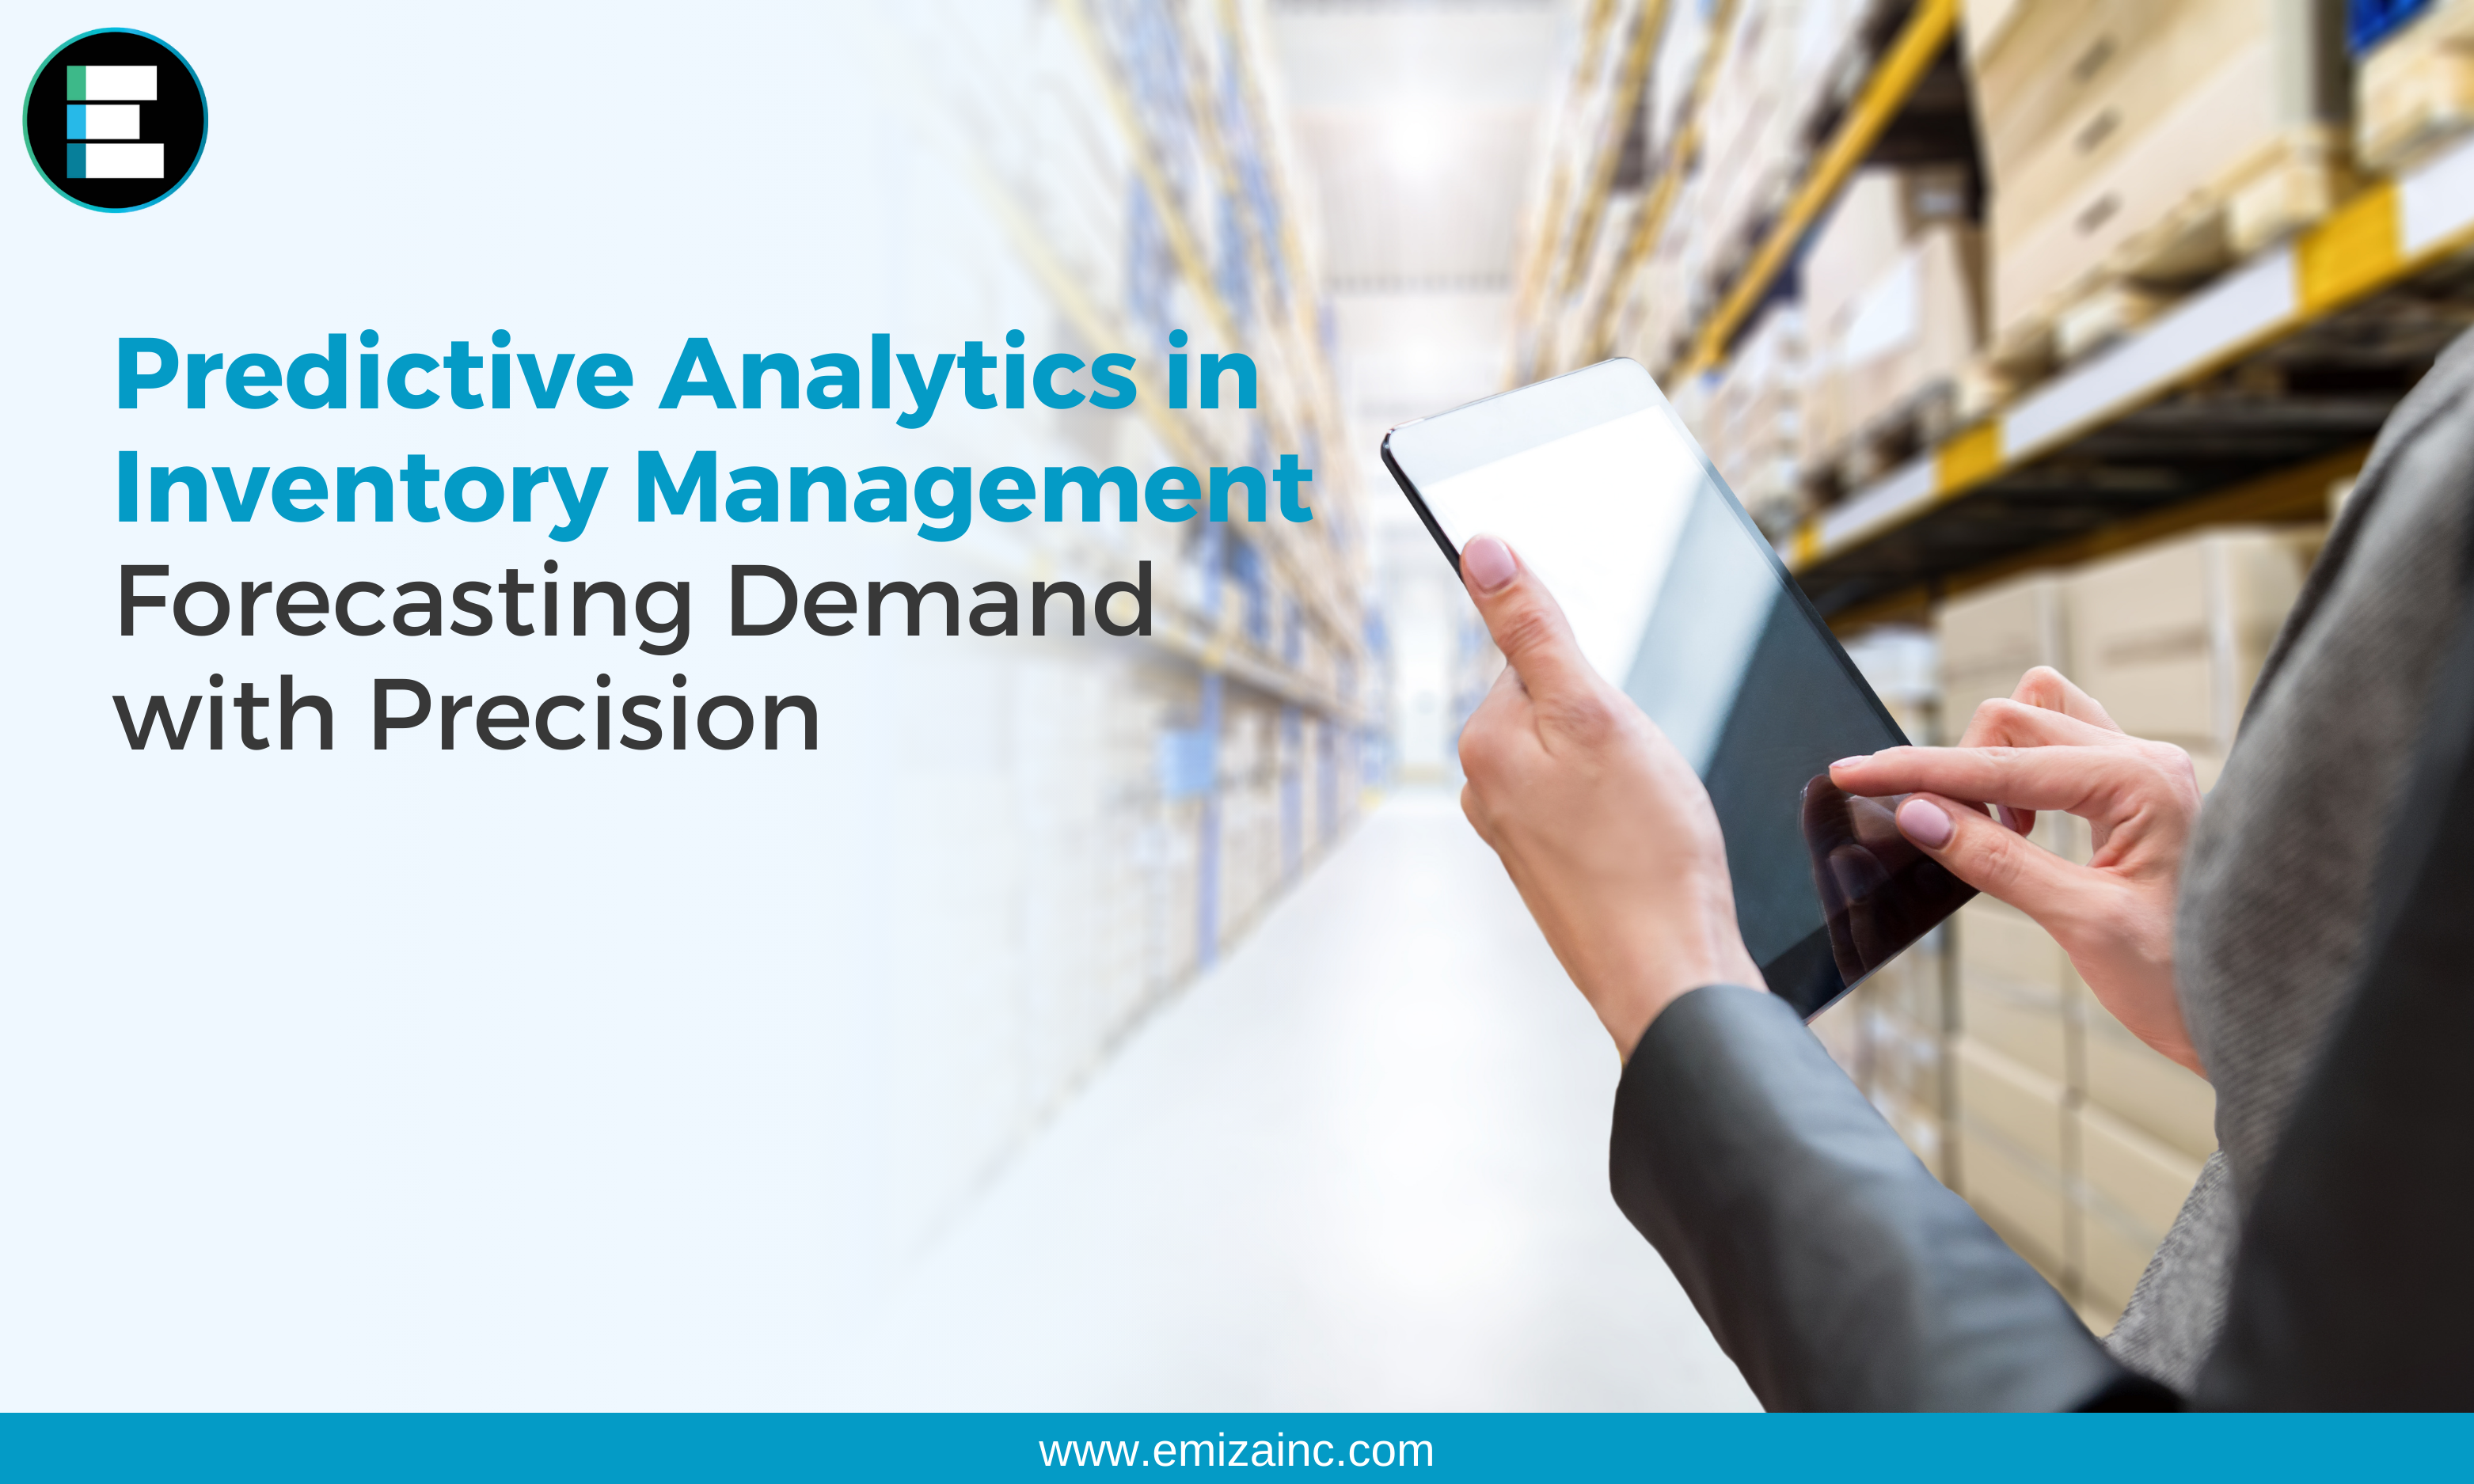 Predictive Analytics in Inventory Management: Forecasting Demand with Precision